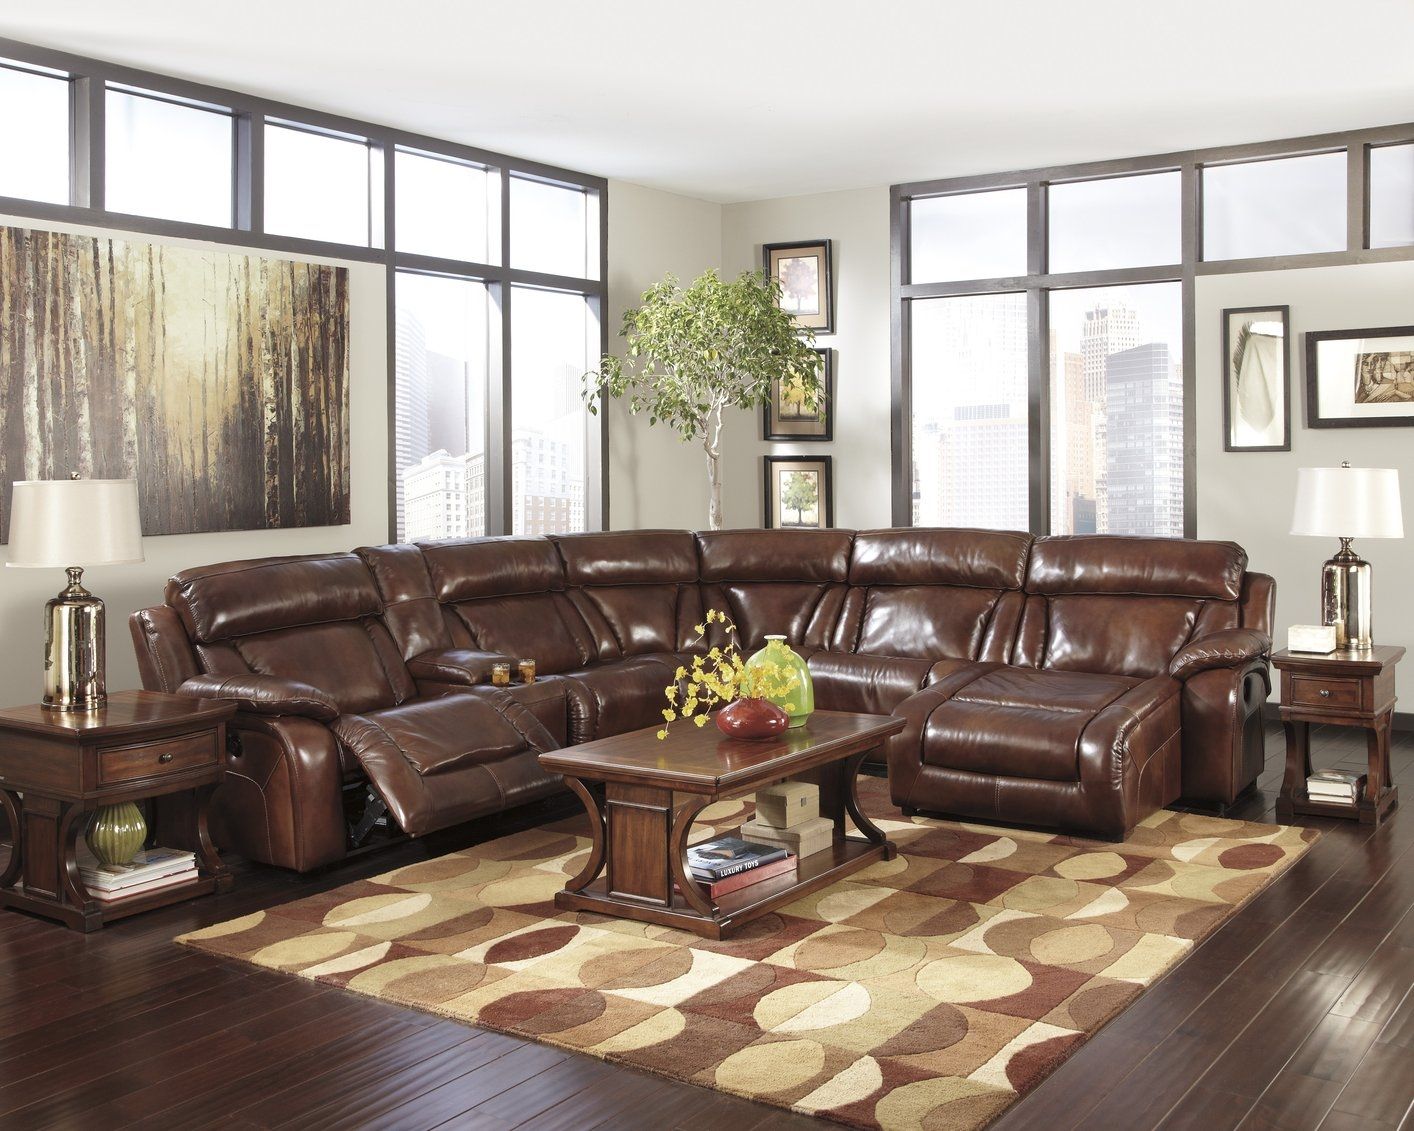 Sectional Sofa Clearance The Best Way To Get High Quality Sofa In Pertaining To Quality Sectional Sofa (View 7 of 15)